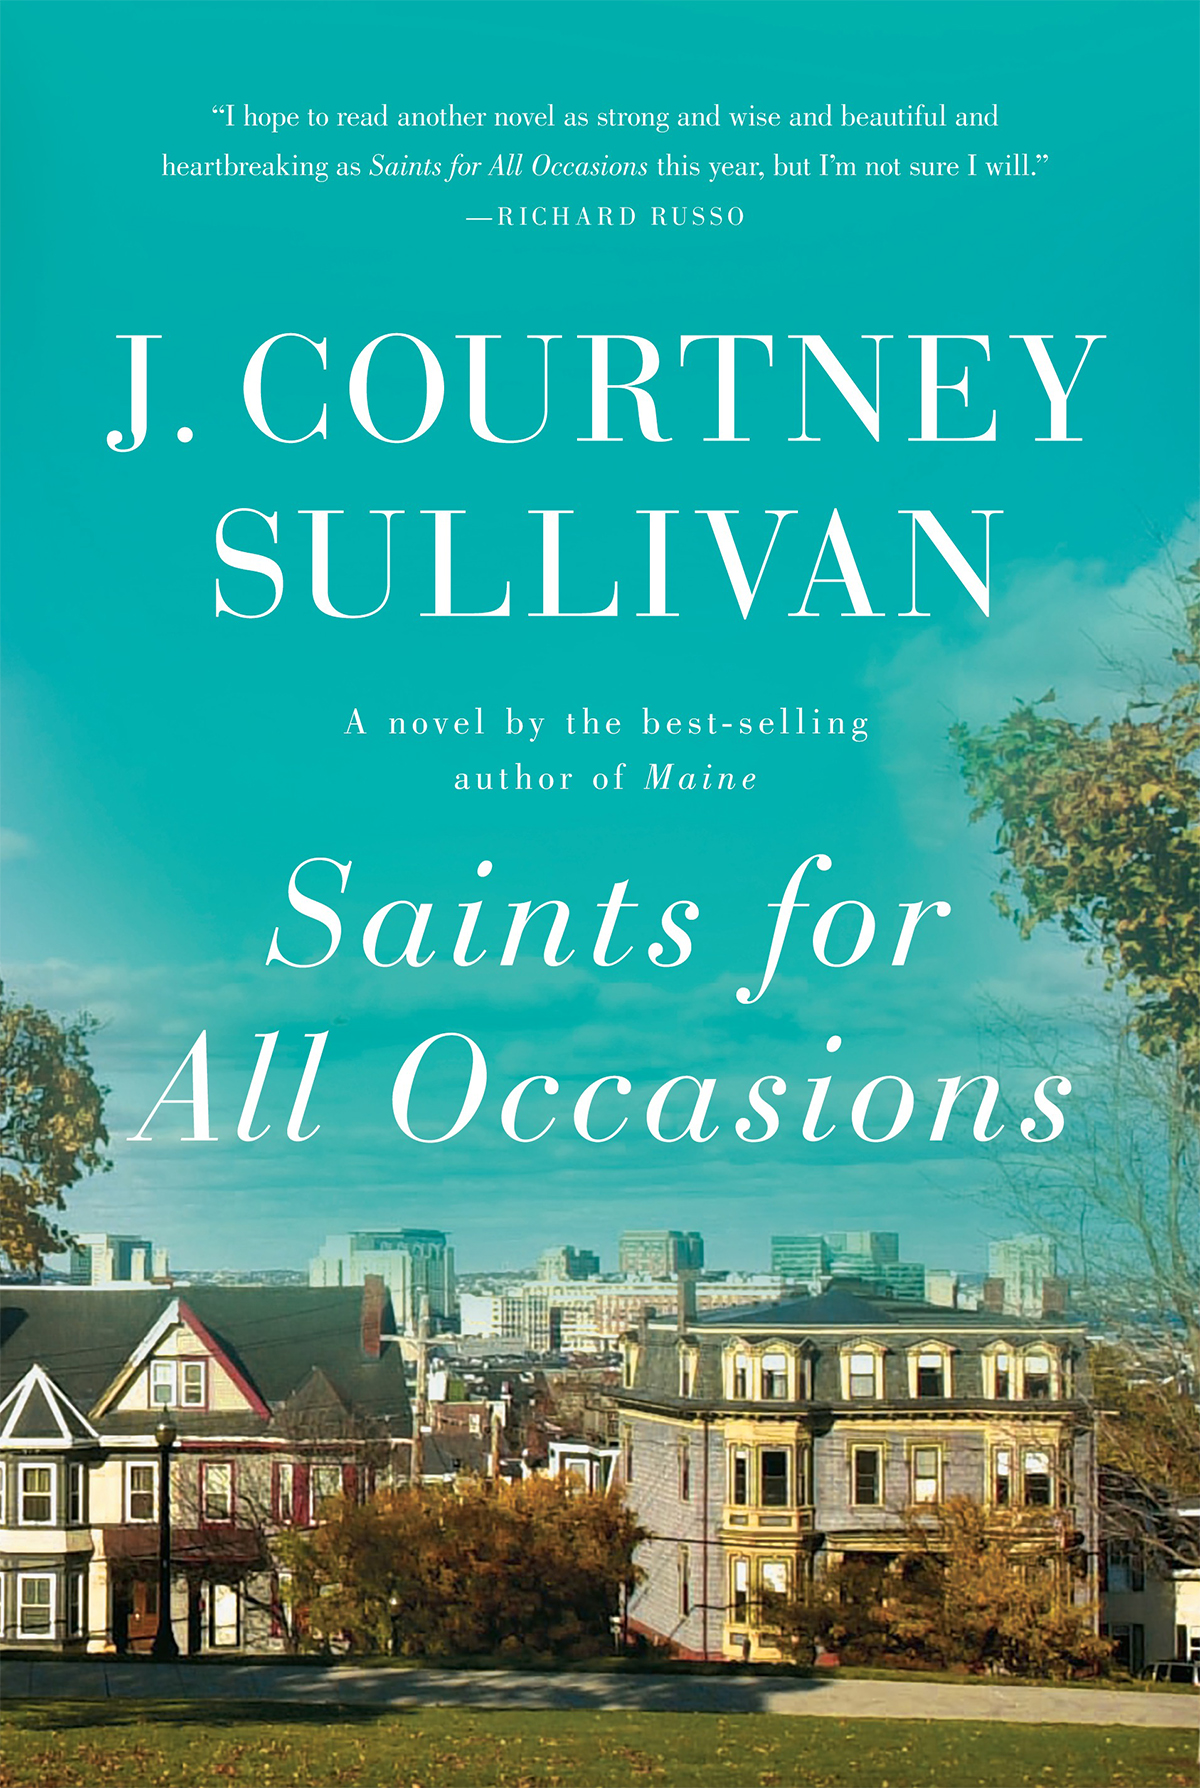 Saints for All Occasions by J. Courtney Sullivan. / Courtesy Photo